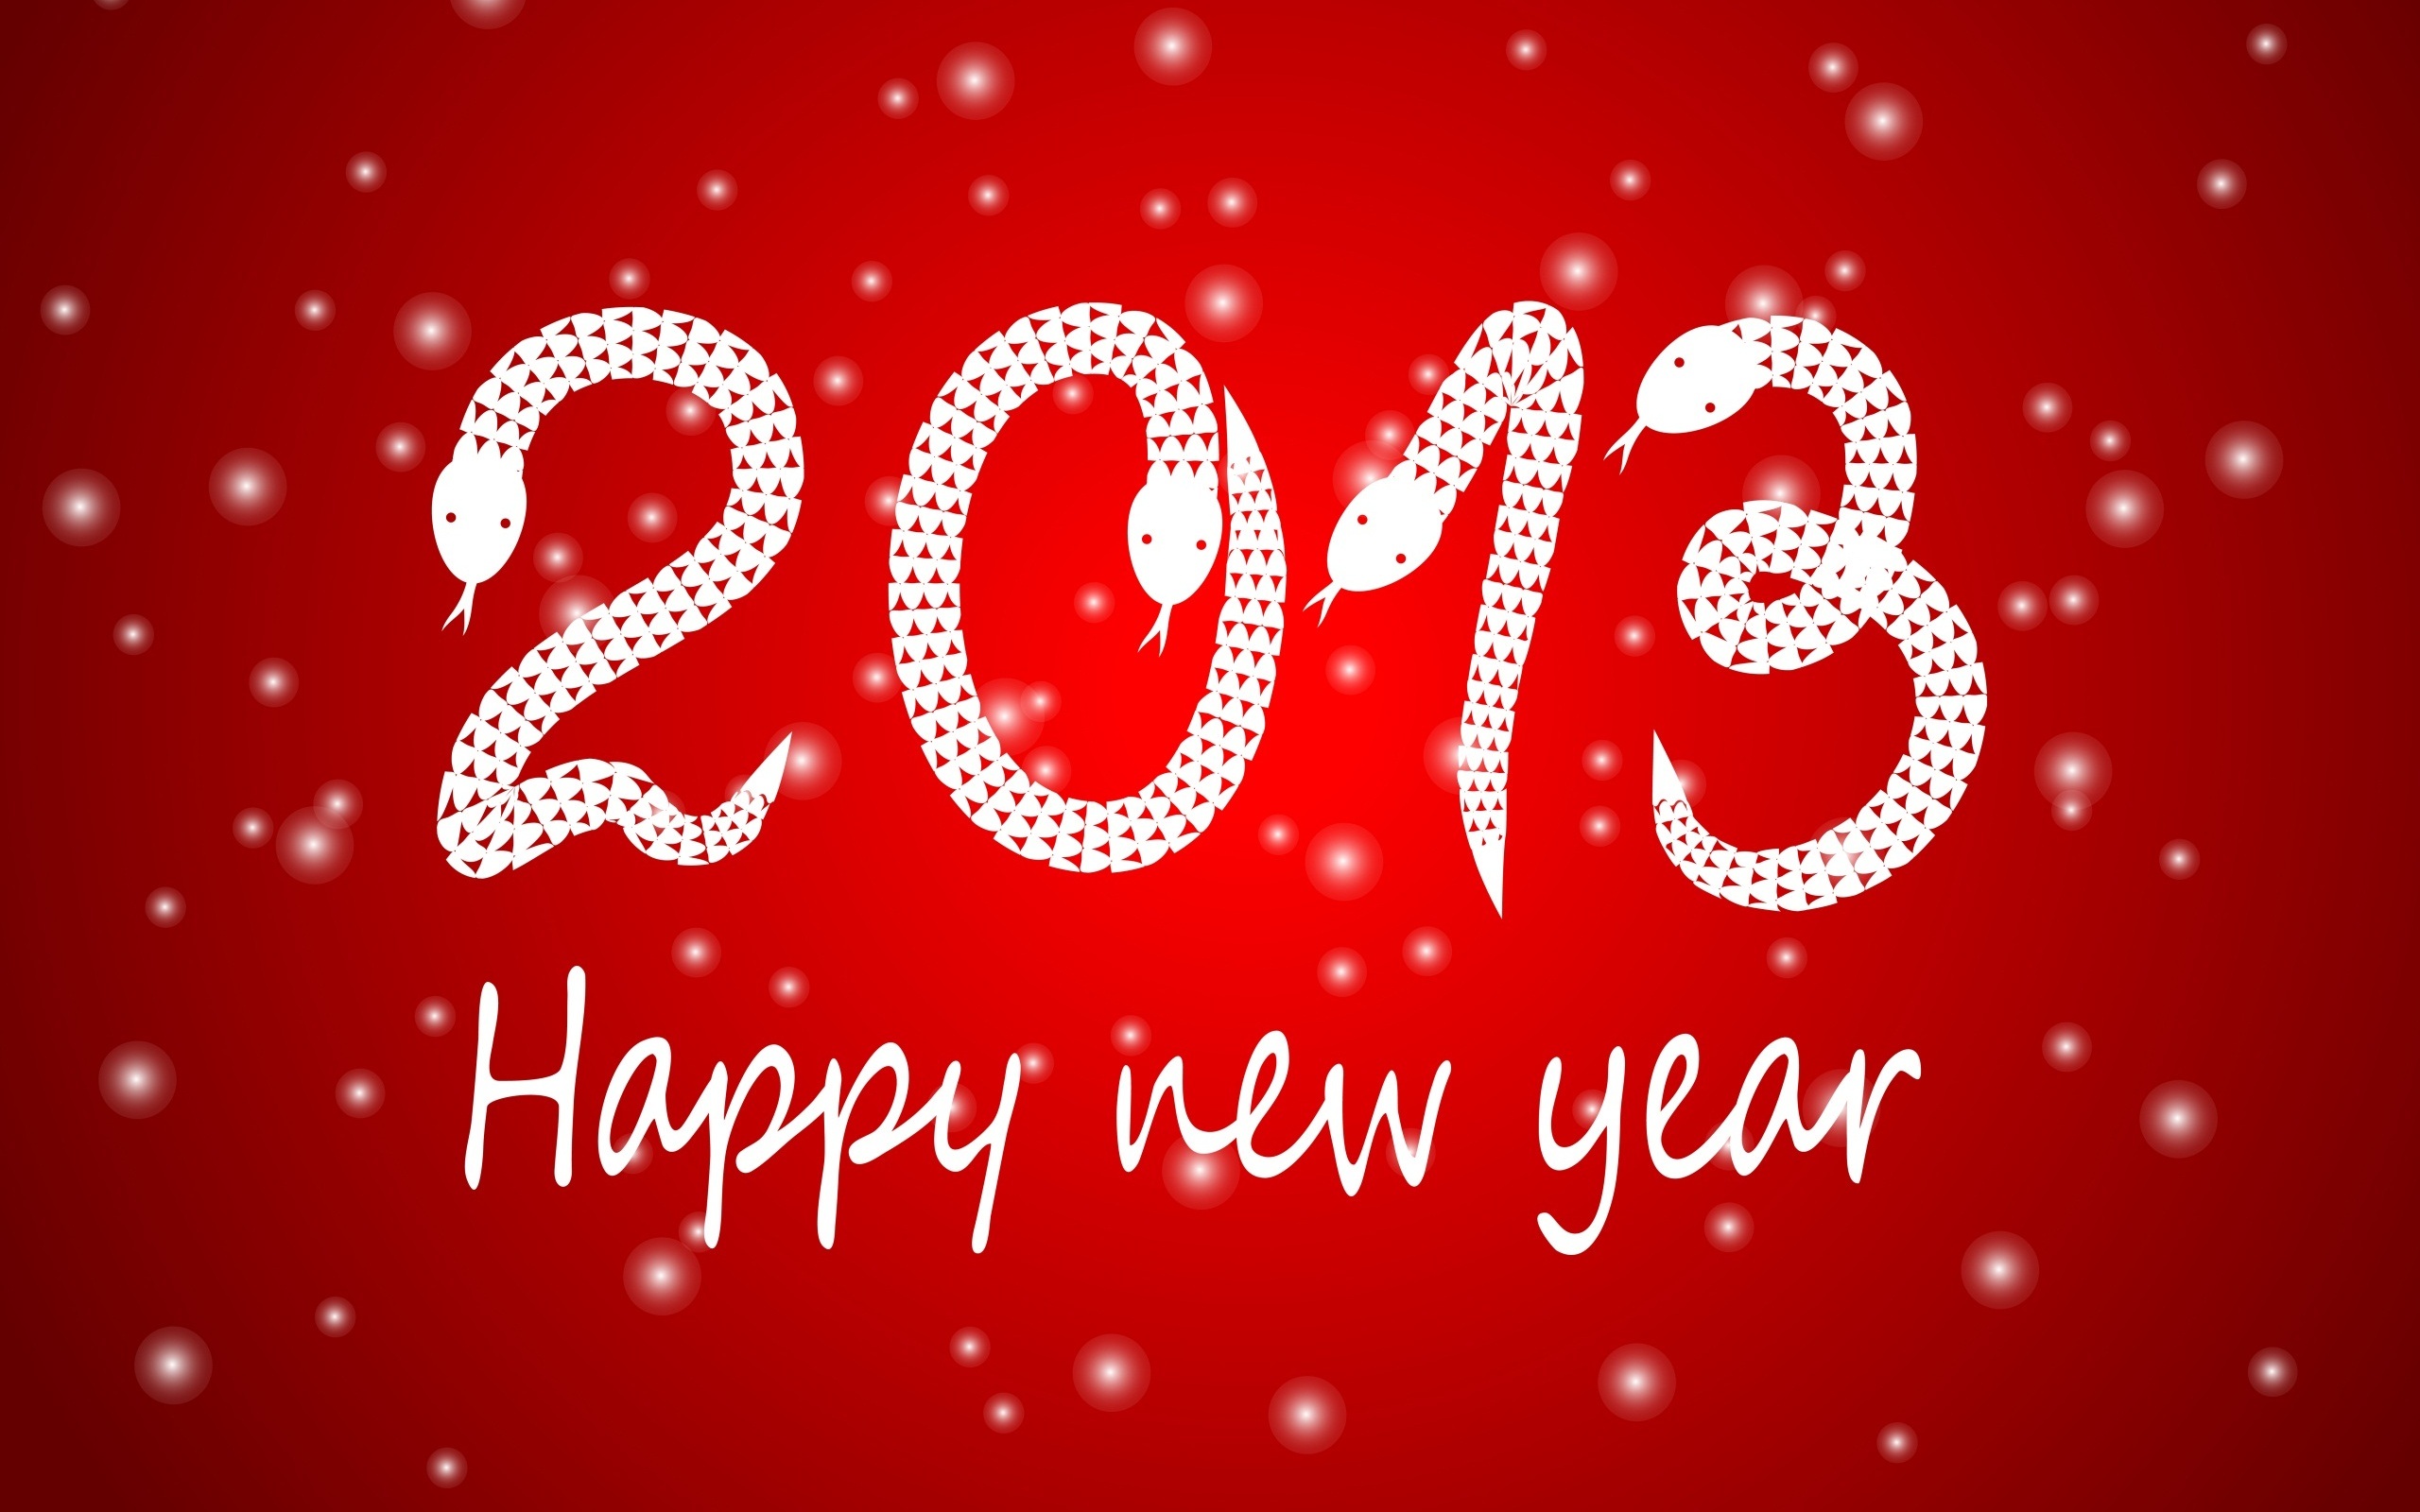 Amazing New Year 2013 Pictures & Backgrounds